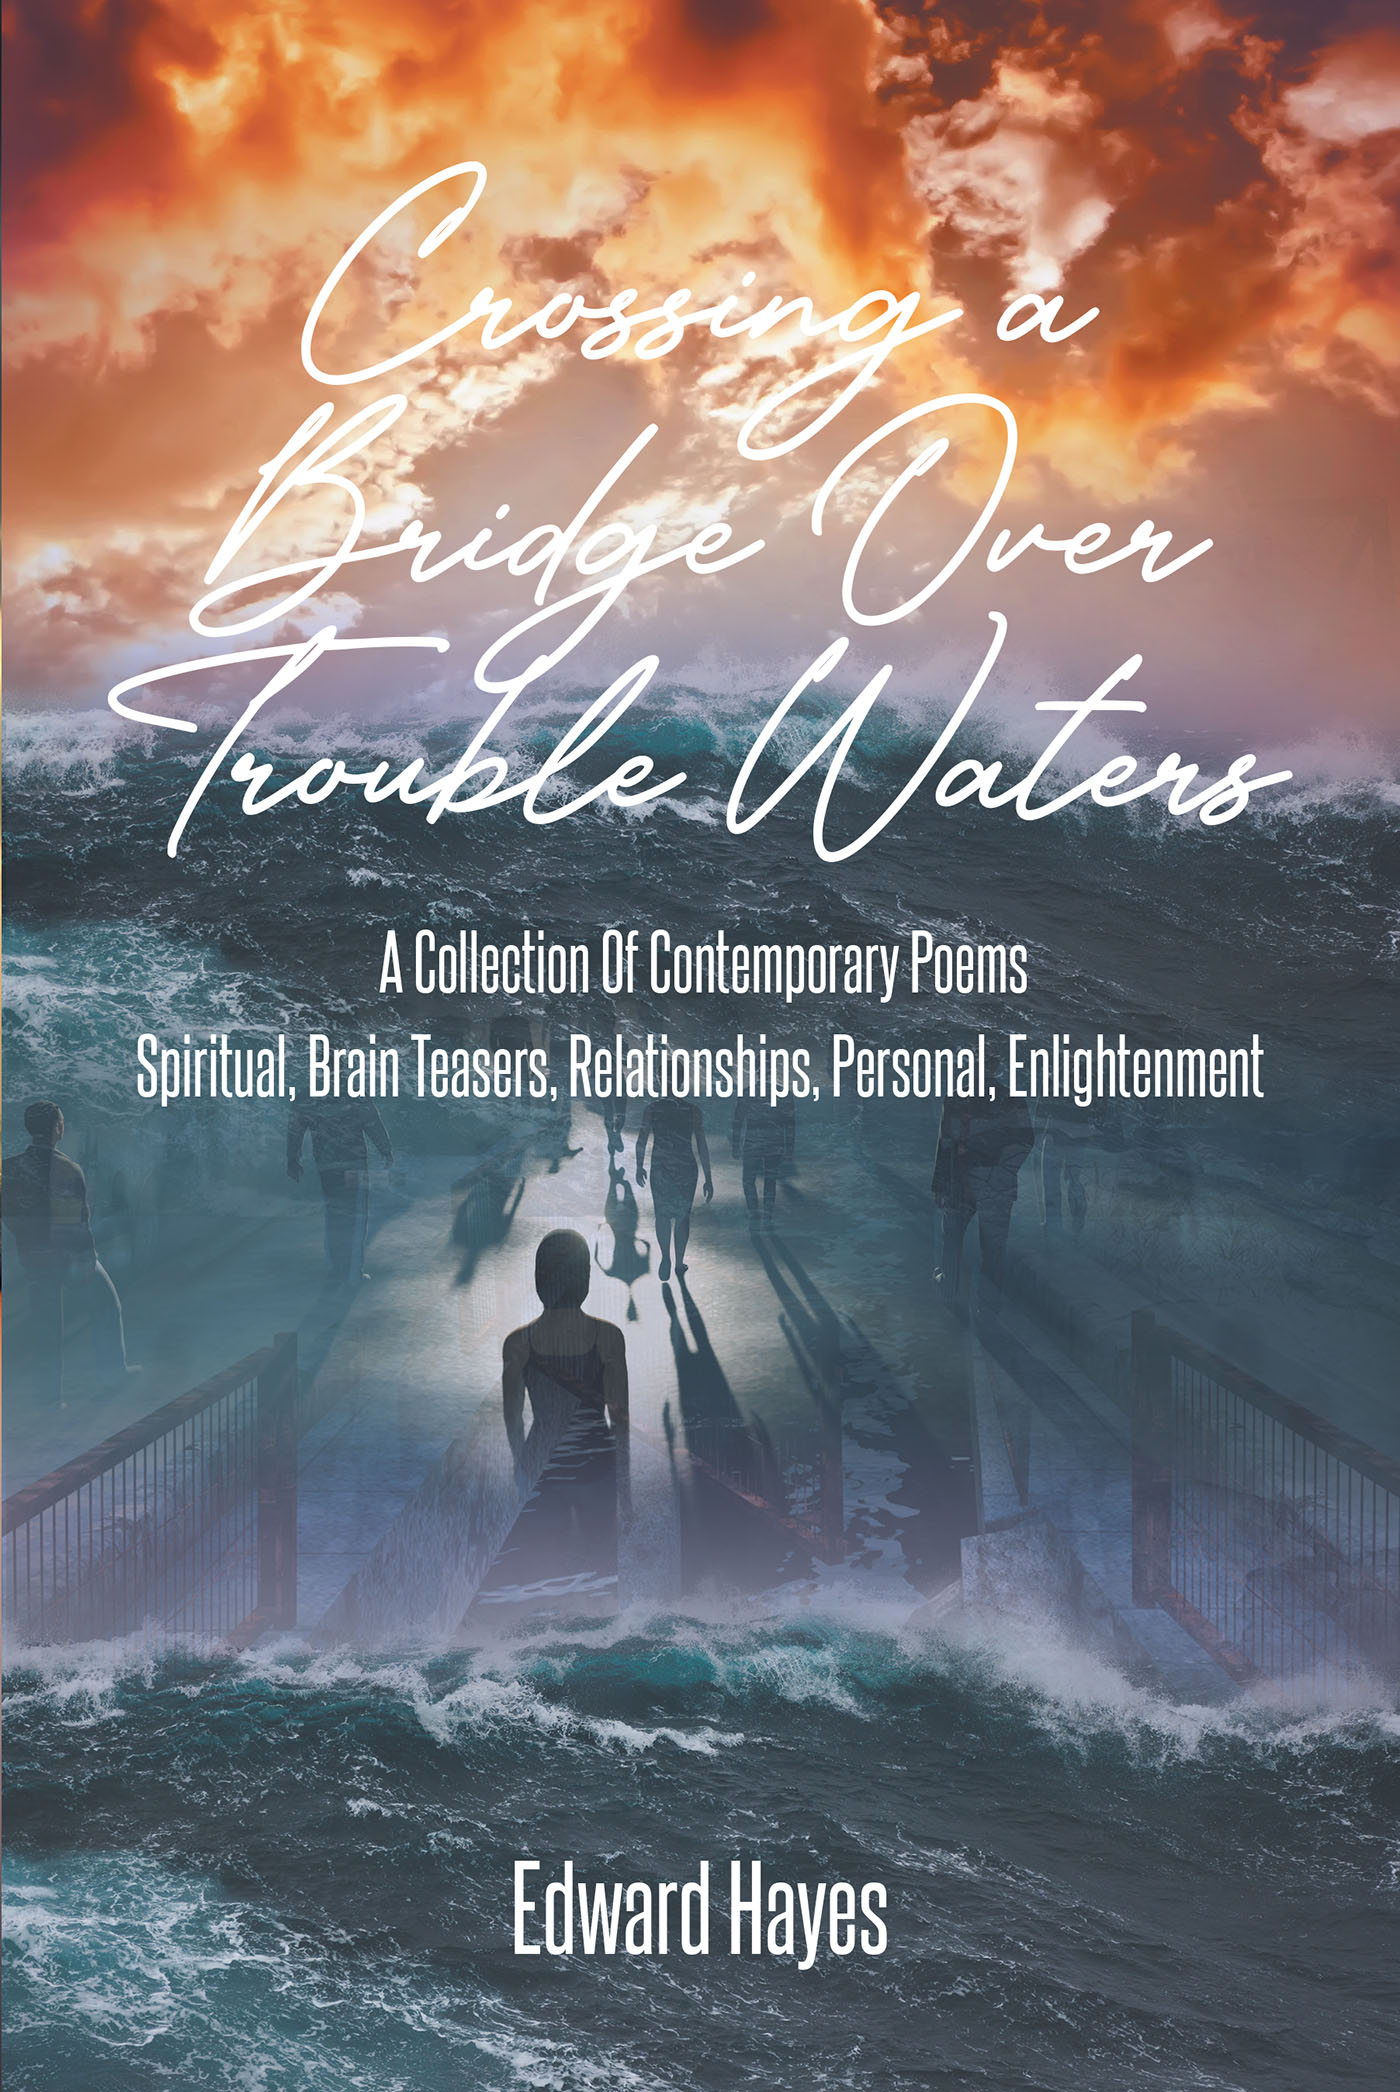 Edward Hayes’s Newly Released "Crossing a Bridge Over Trouble Waters" is a Thoughtful Collection of Writings Meant to Inspire and Challenge the Mind